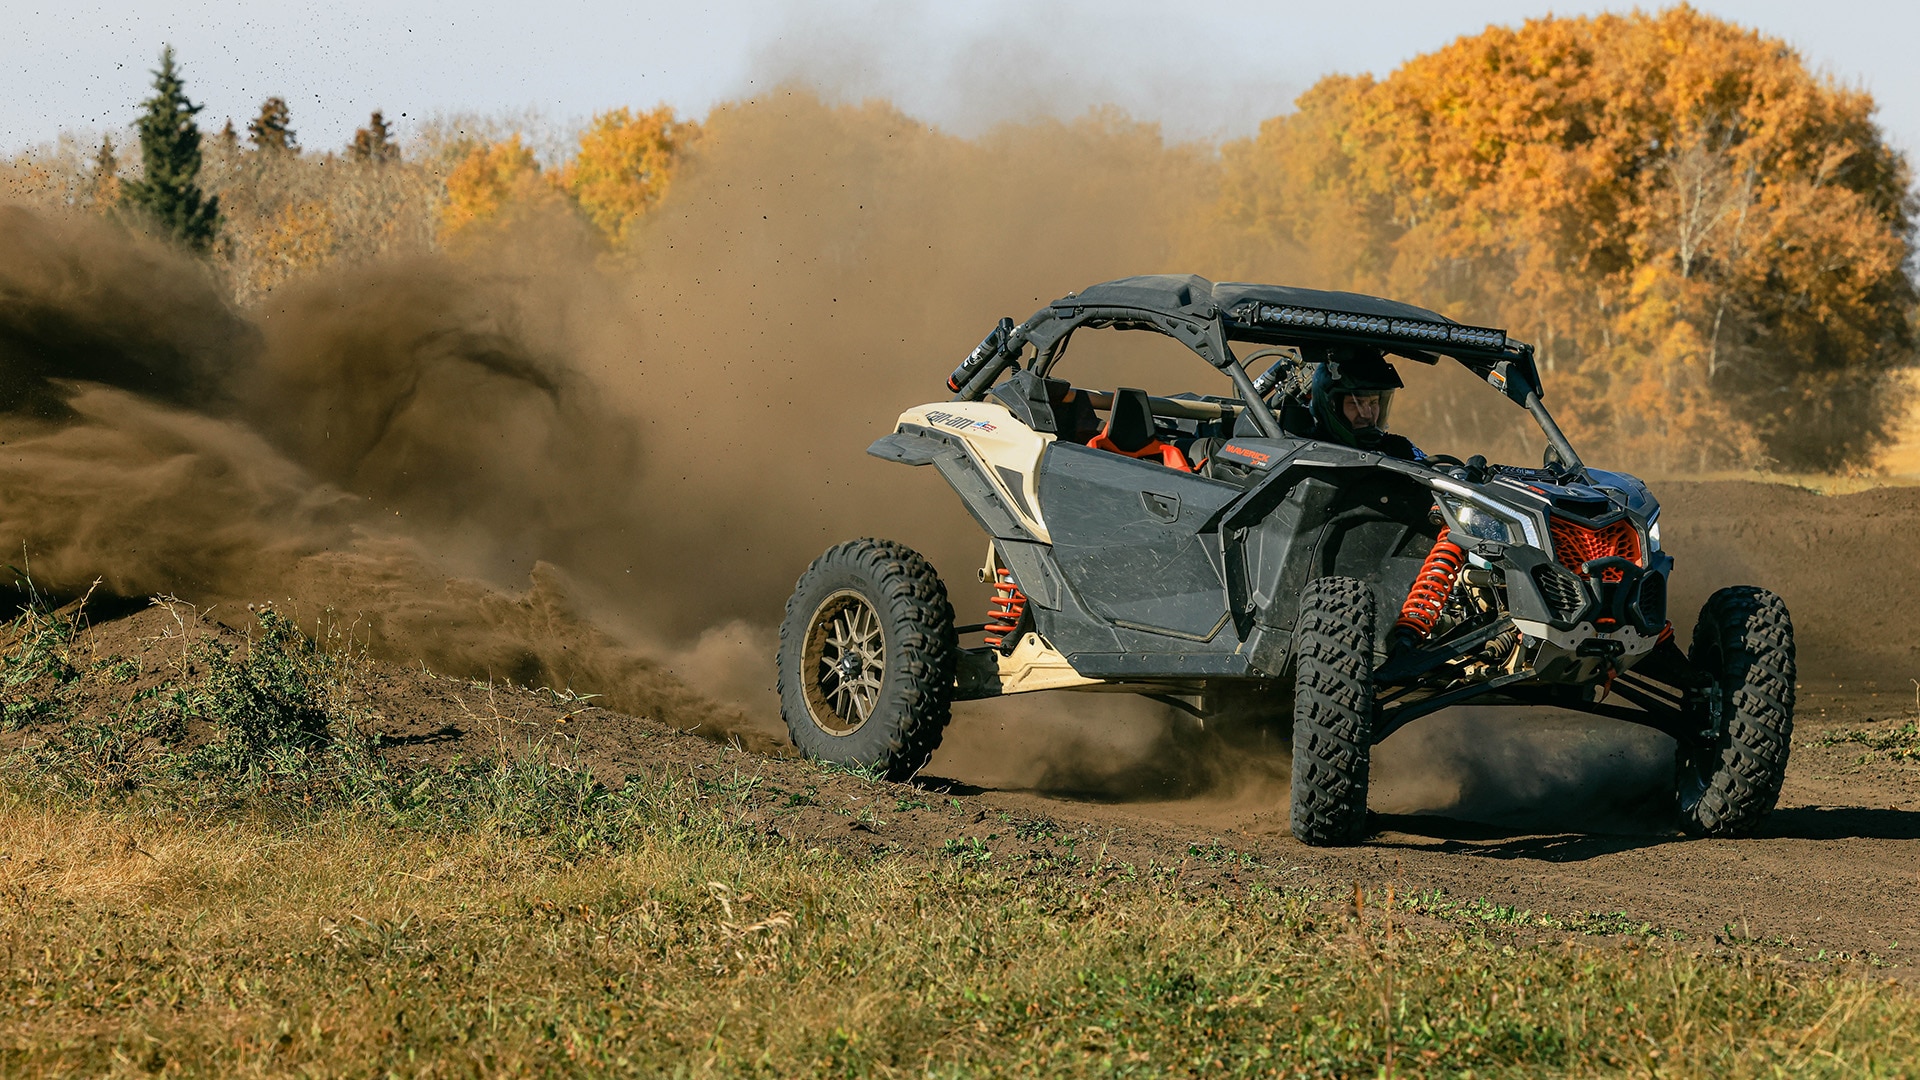 Can-Am Maverick RS Turbo SxS burning rubber on a dirt road